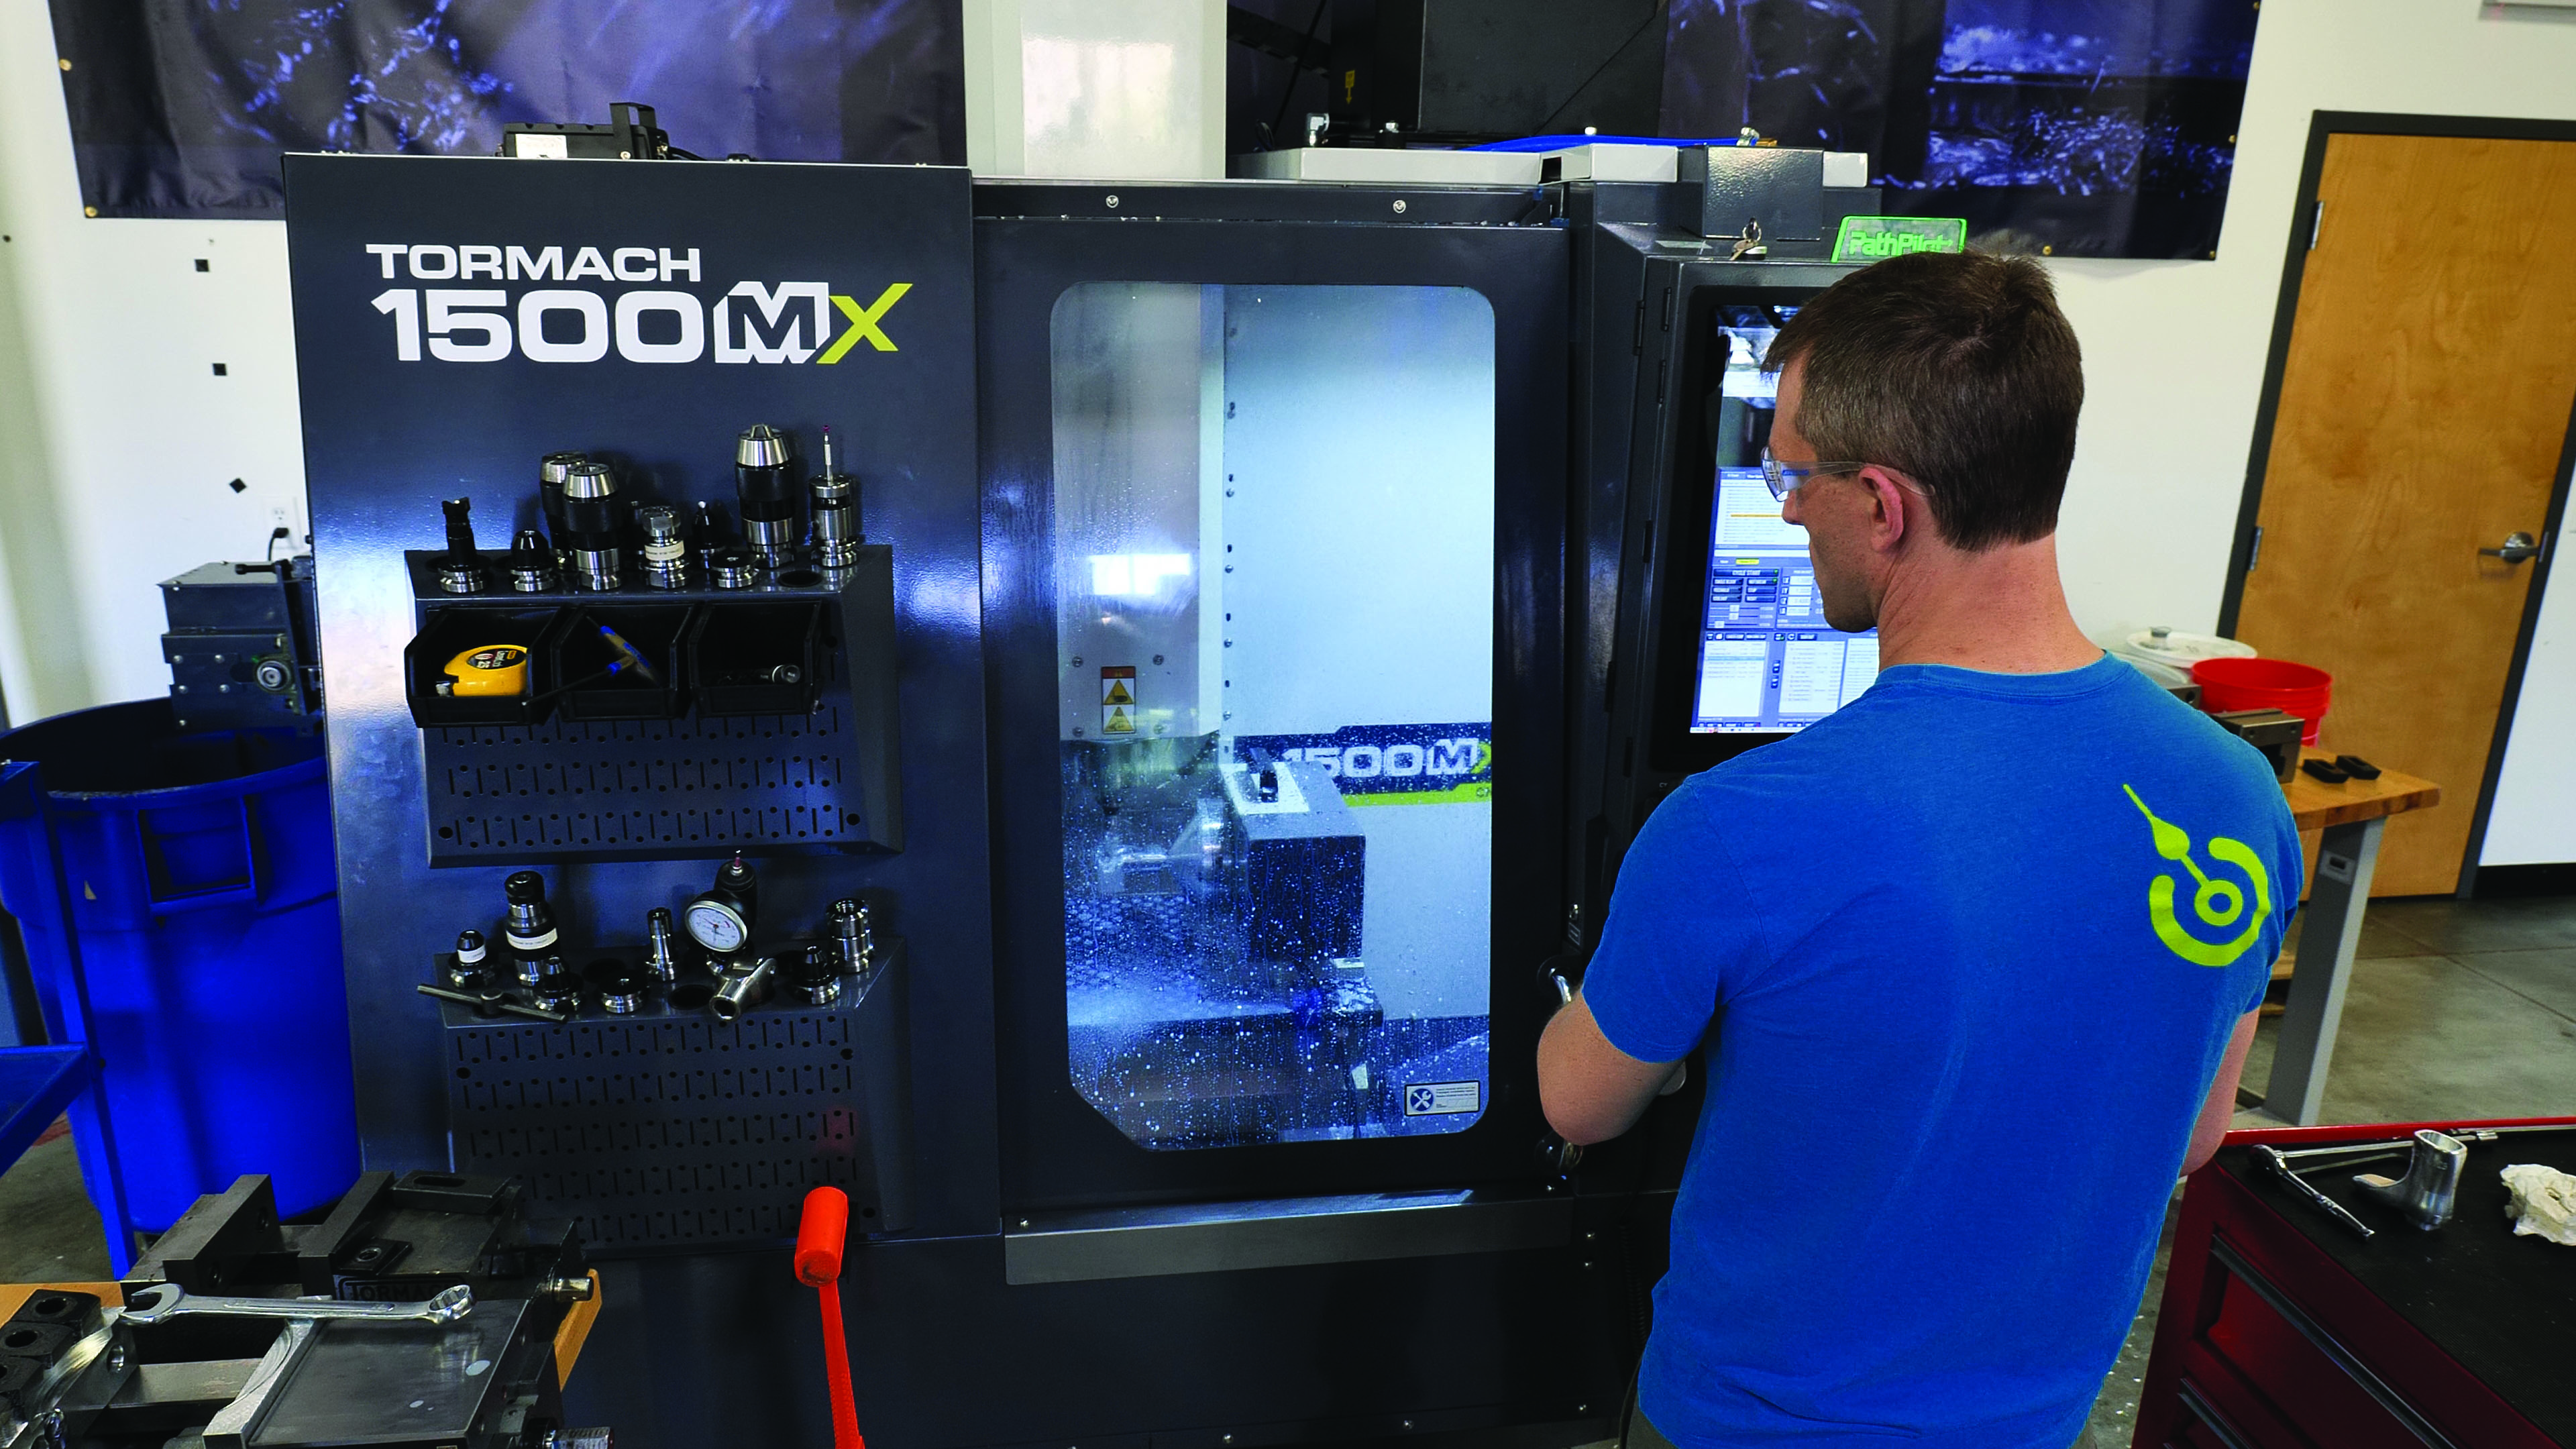 The 1500MX is billed as a low-cost but highly capable CNC mill for prototyping and production.